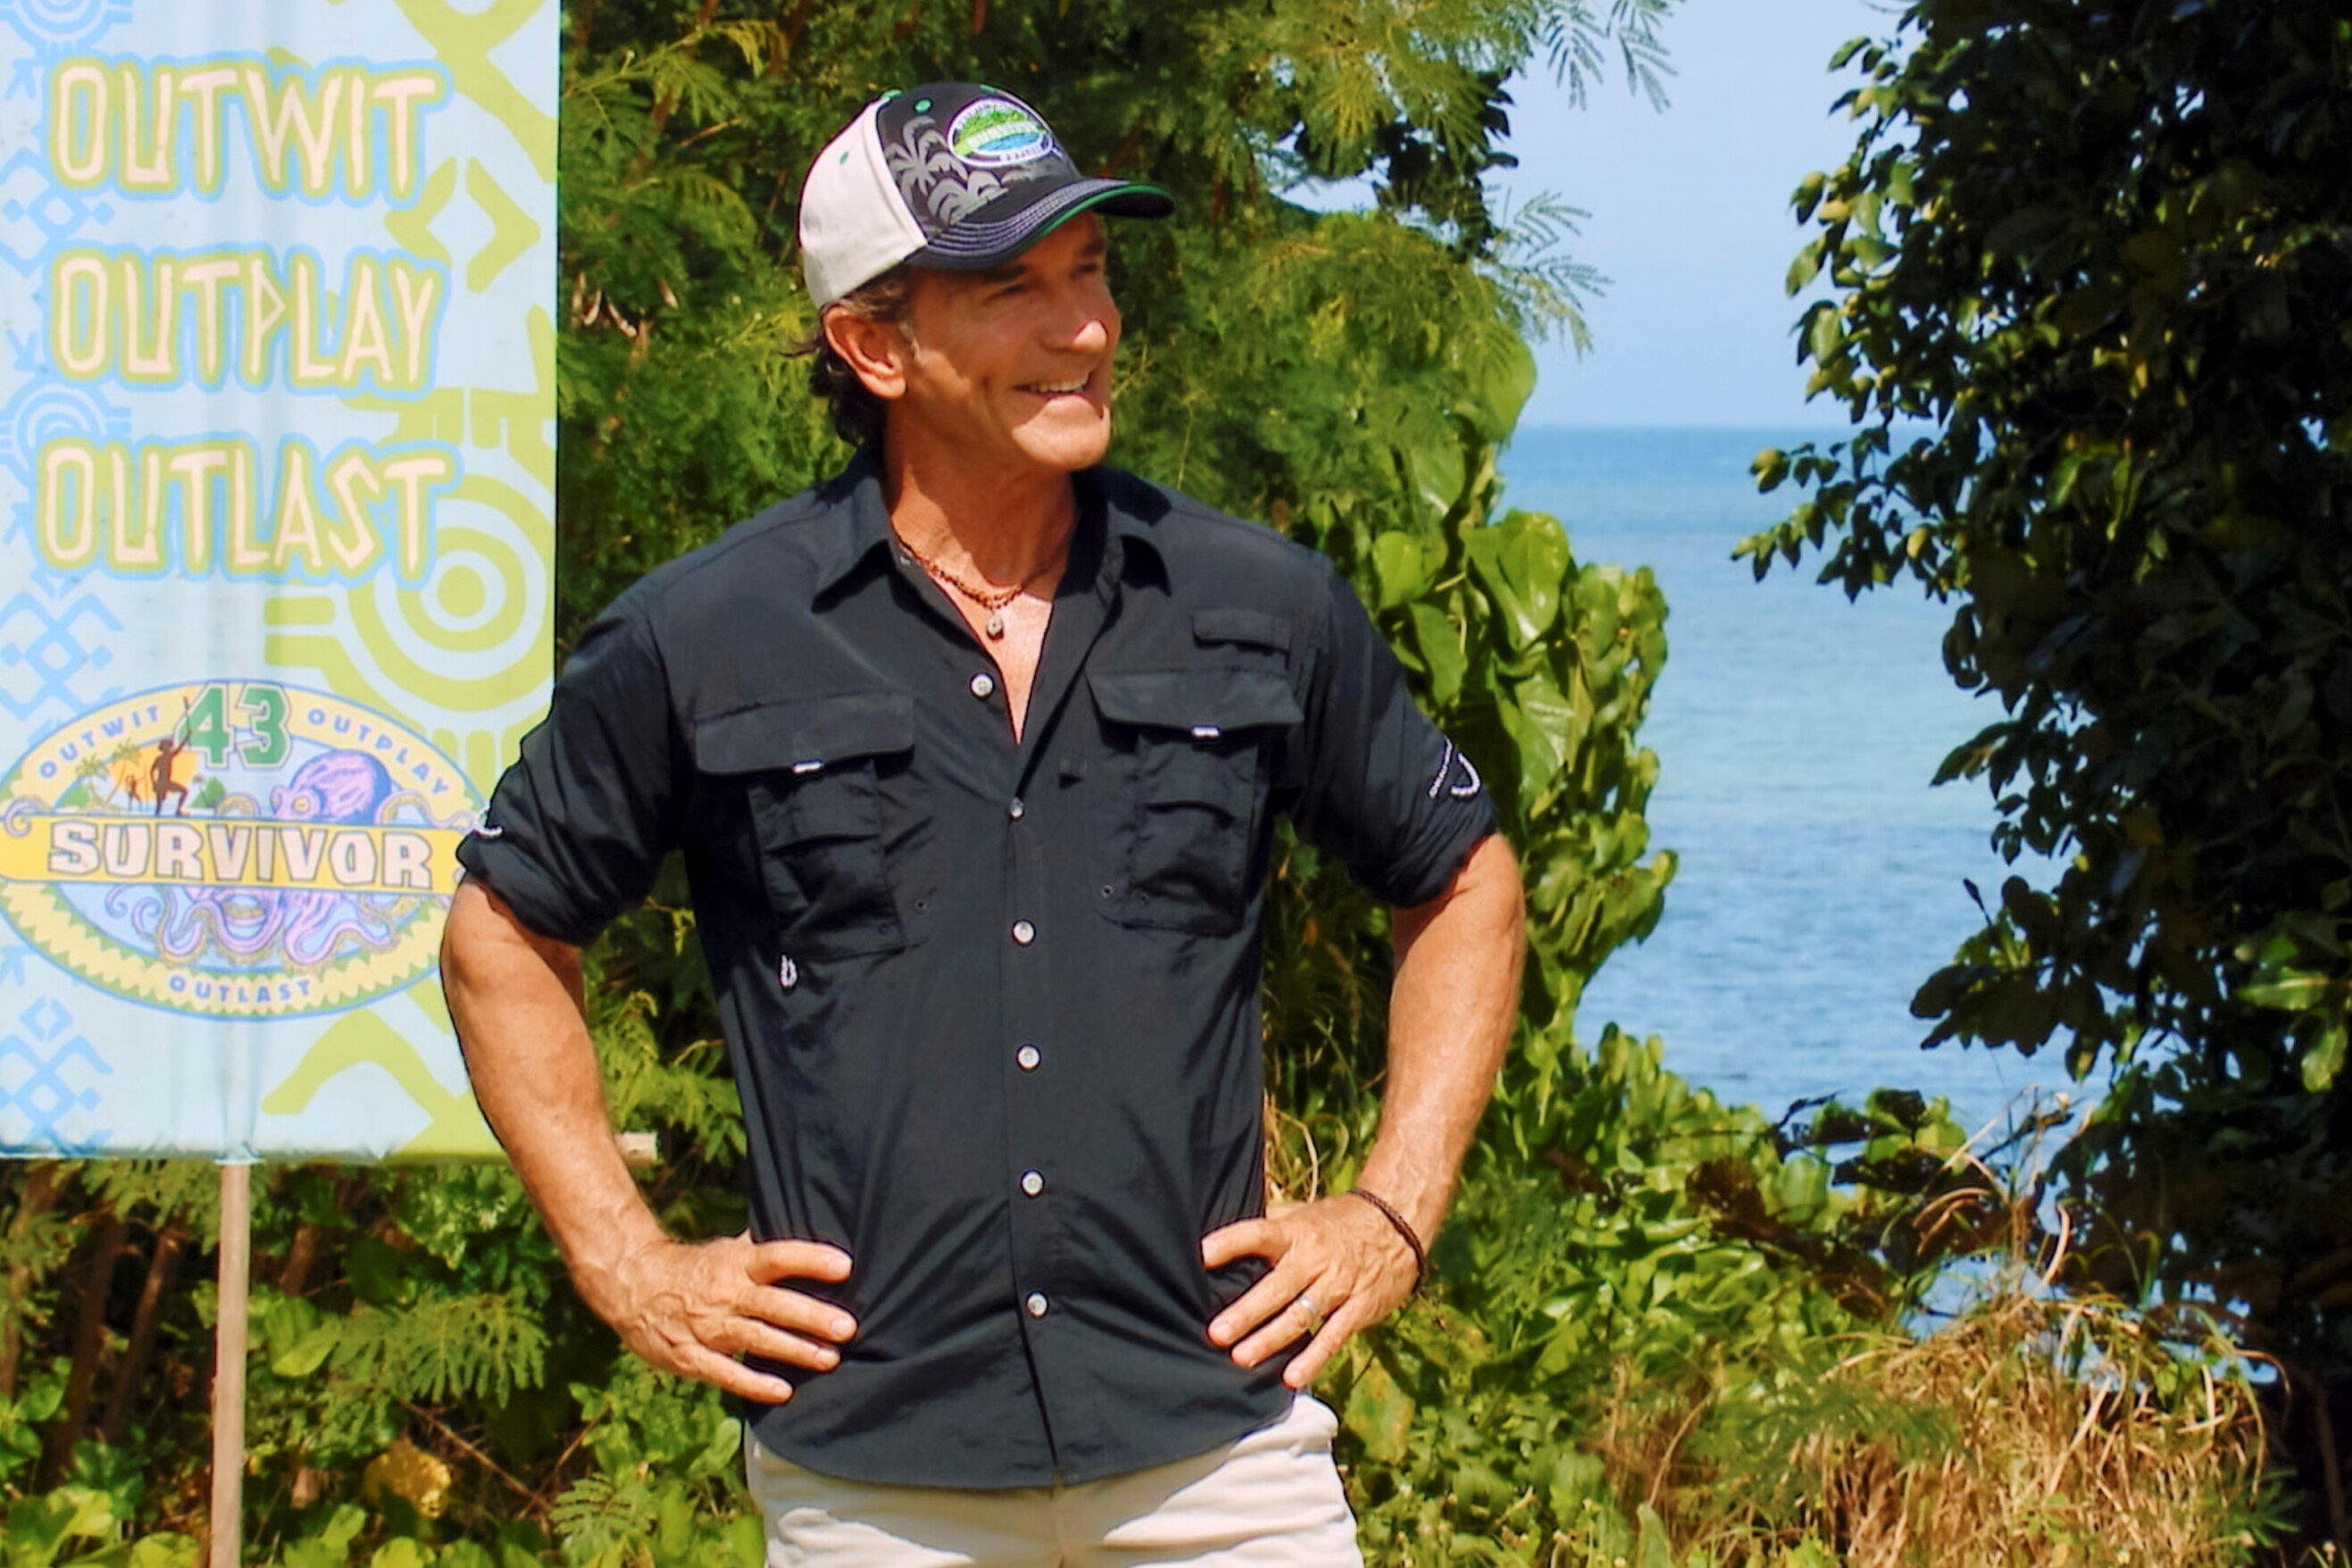 Jeff Probst, who hosts the reality competition series, 'Survivor,' on CBS, wears a black button-up shirt with rolled-up sleeves, white shorts, and a black, white, and green 'Survivor' baseball hat.